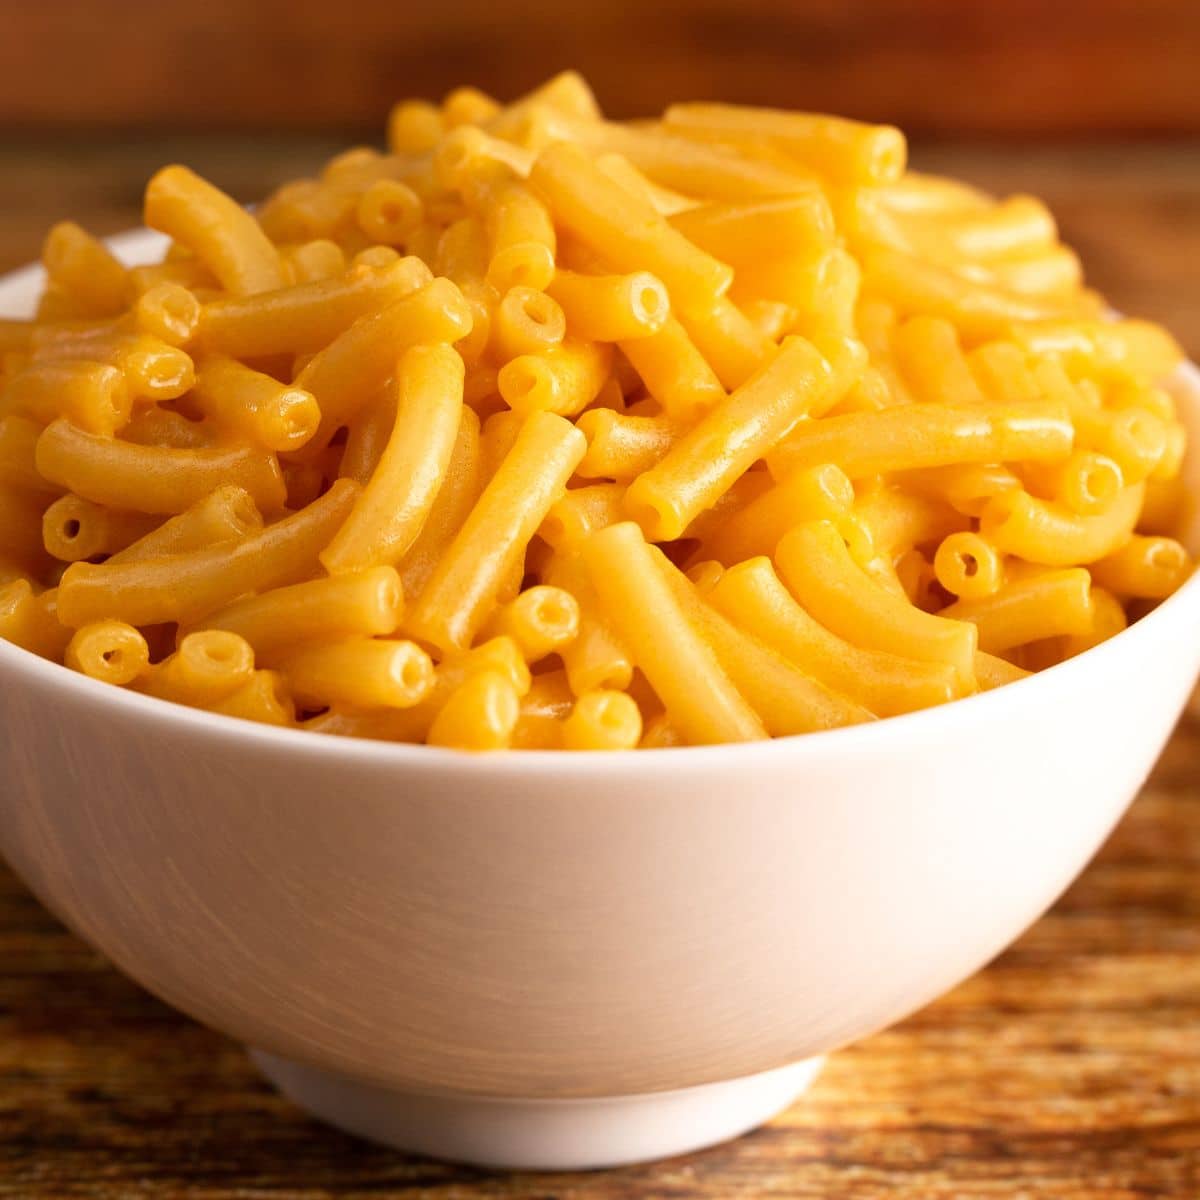 Square image of cooked boxed mac & cheese in a white bowl.